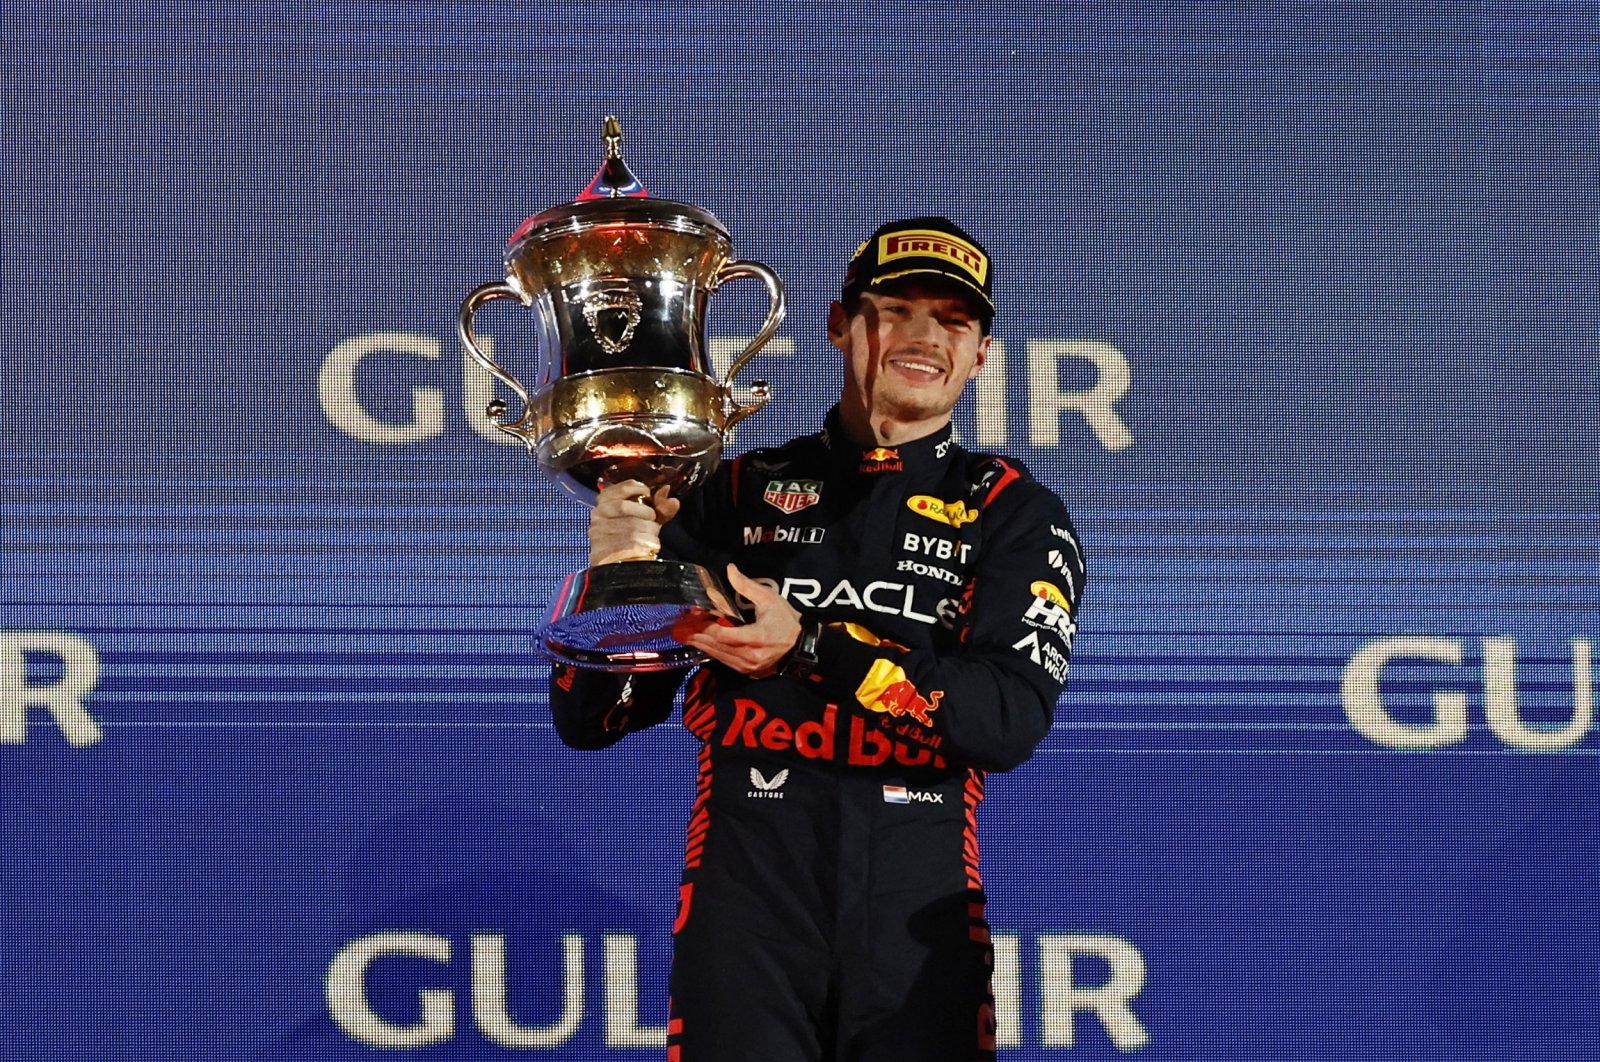 Red Bull&#039;s Max Verstappen celebrates on the podium with a trophy after winning the Bahrain Grand Prix Formula One at the Bahrain International Circuit, Sakhir, Bahrain, March 5, 2023. (Reuters Photo)